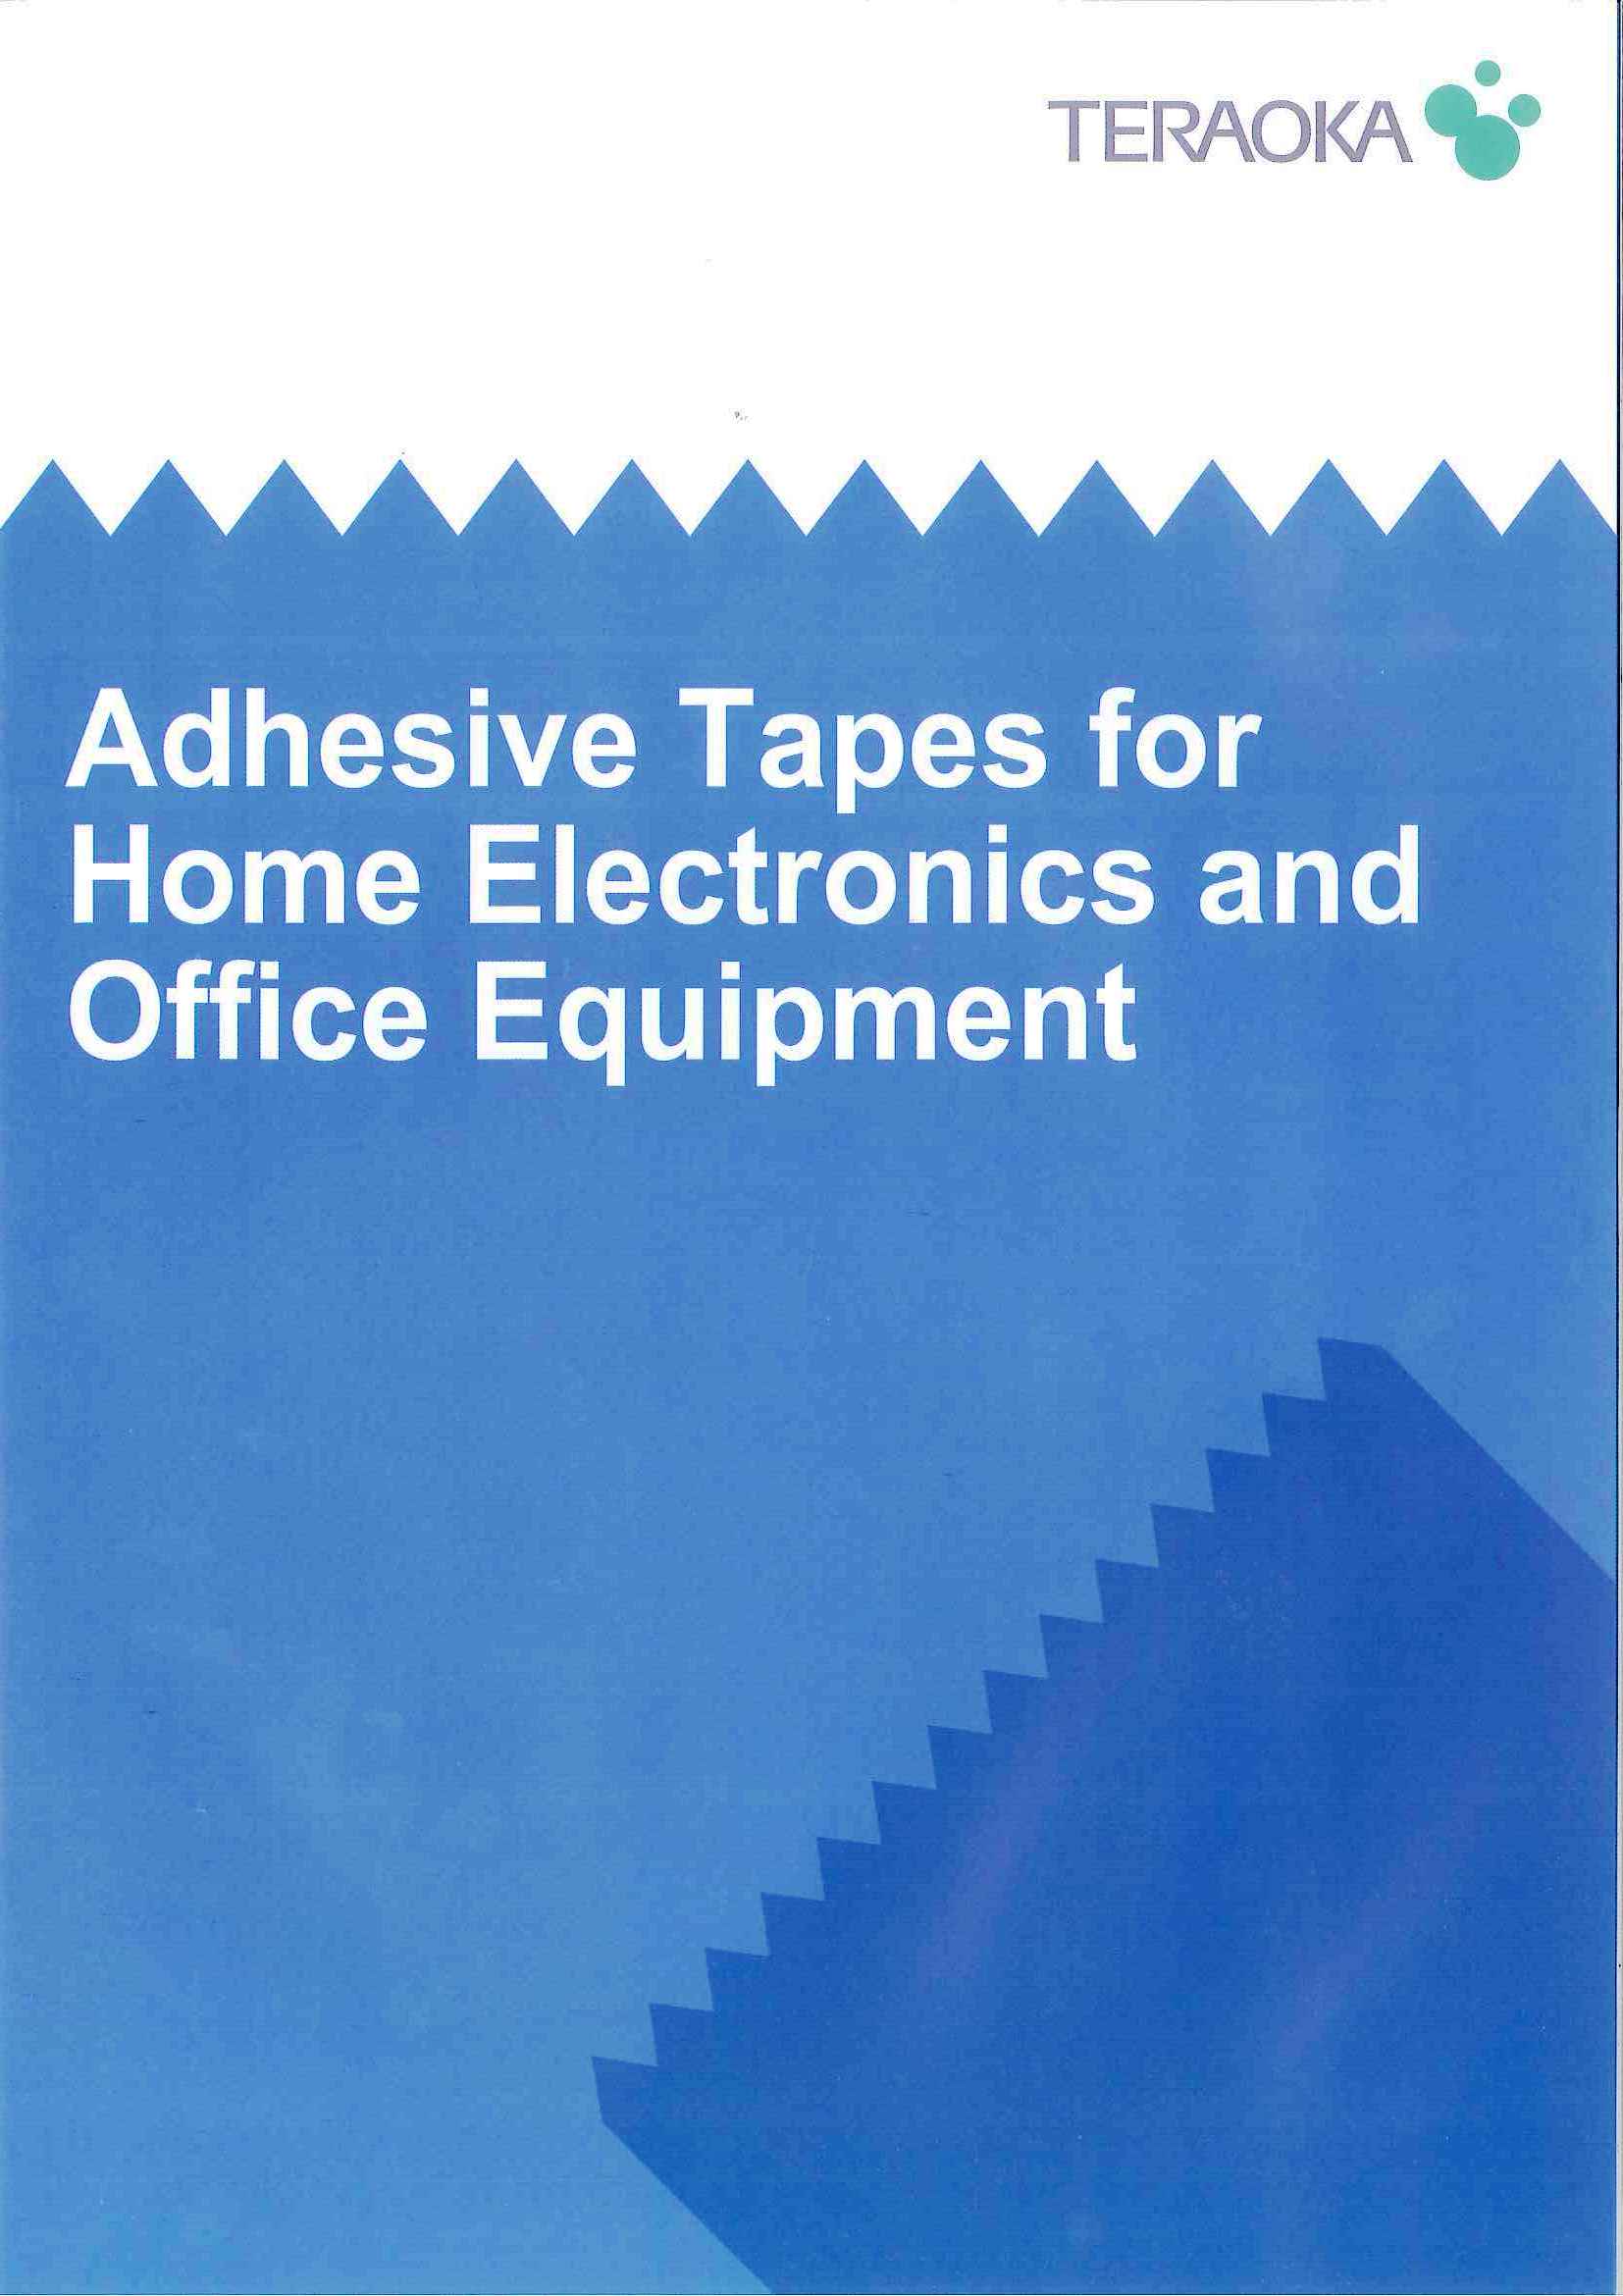 Adhesive_Tapes_for_Home_Electronics_and_Office_Equipment